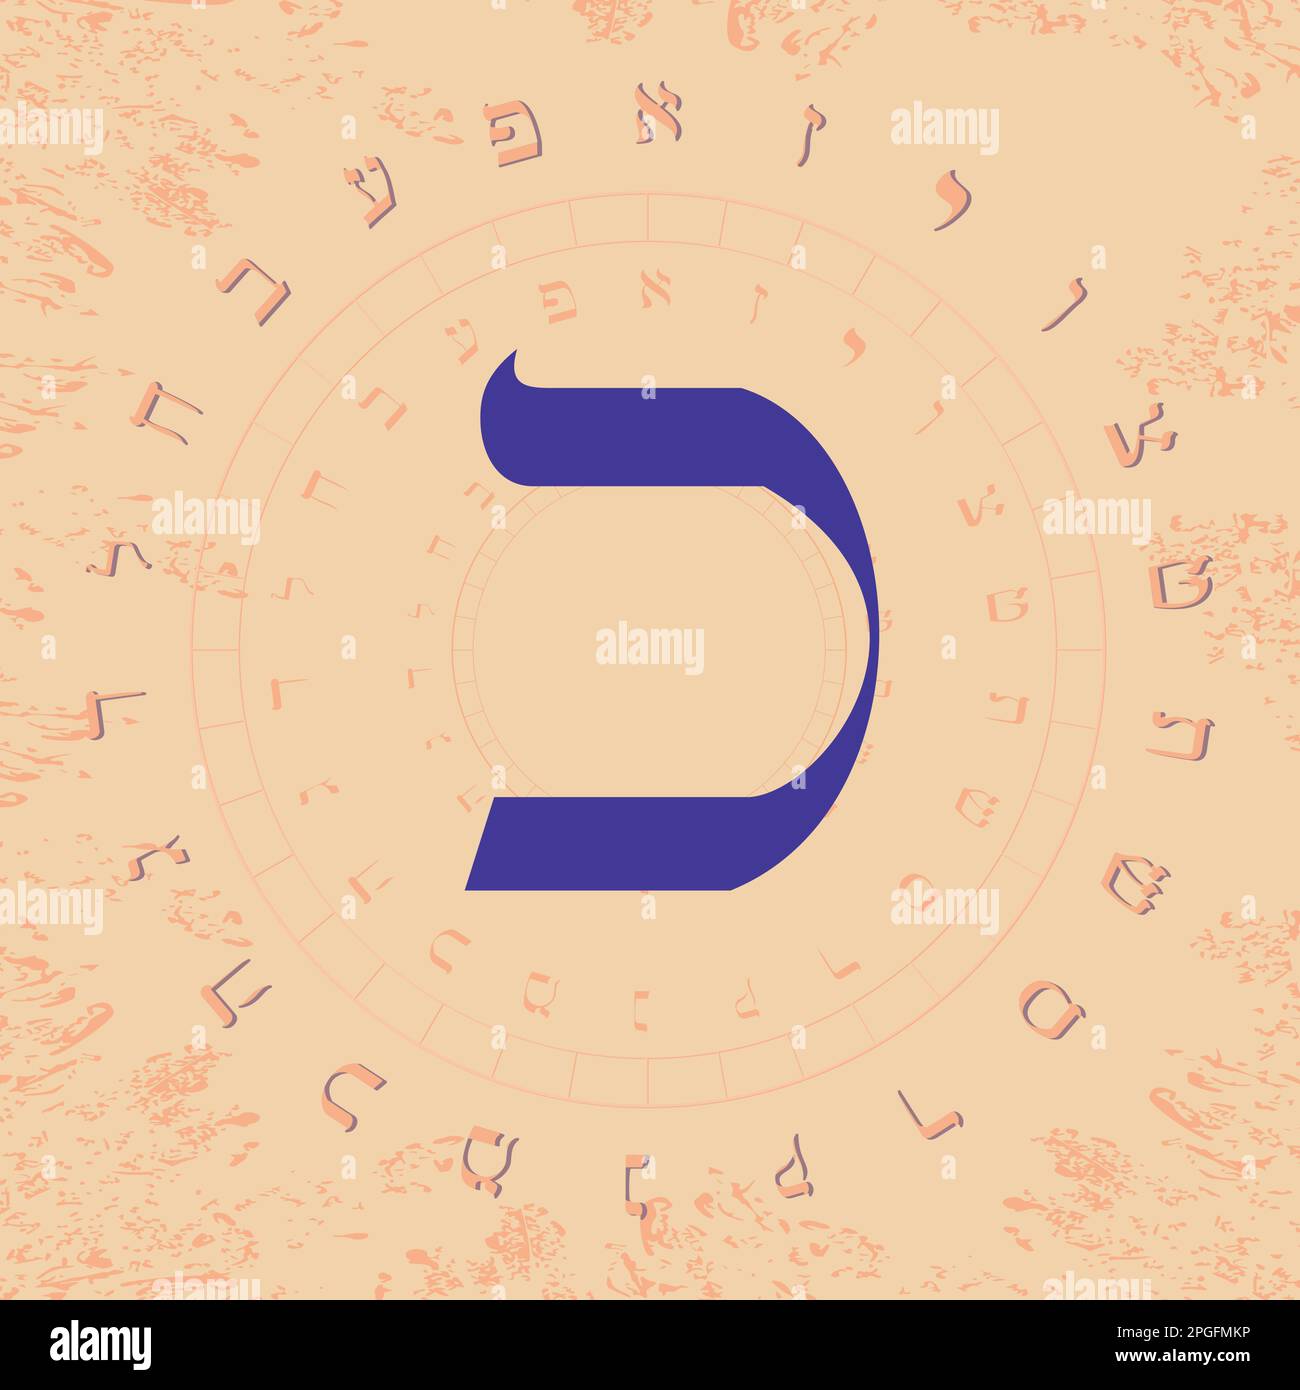 Vector illustration of the Hebrew alphabet in circular design. Hebrew letter called Kaph large and blue. Stock Vector